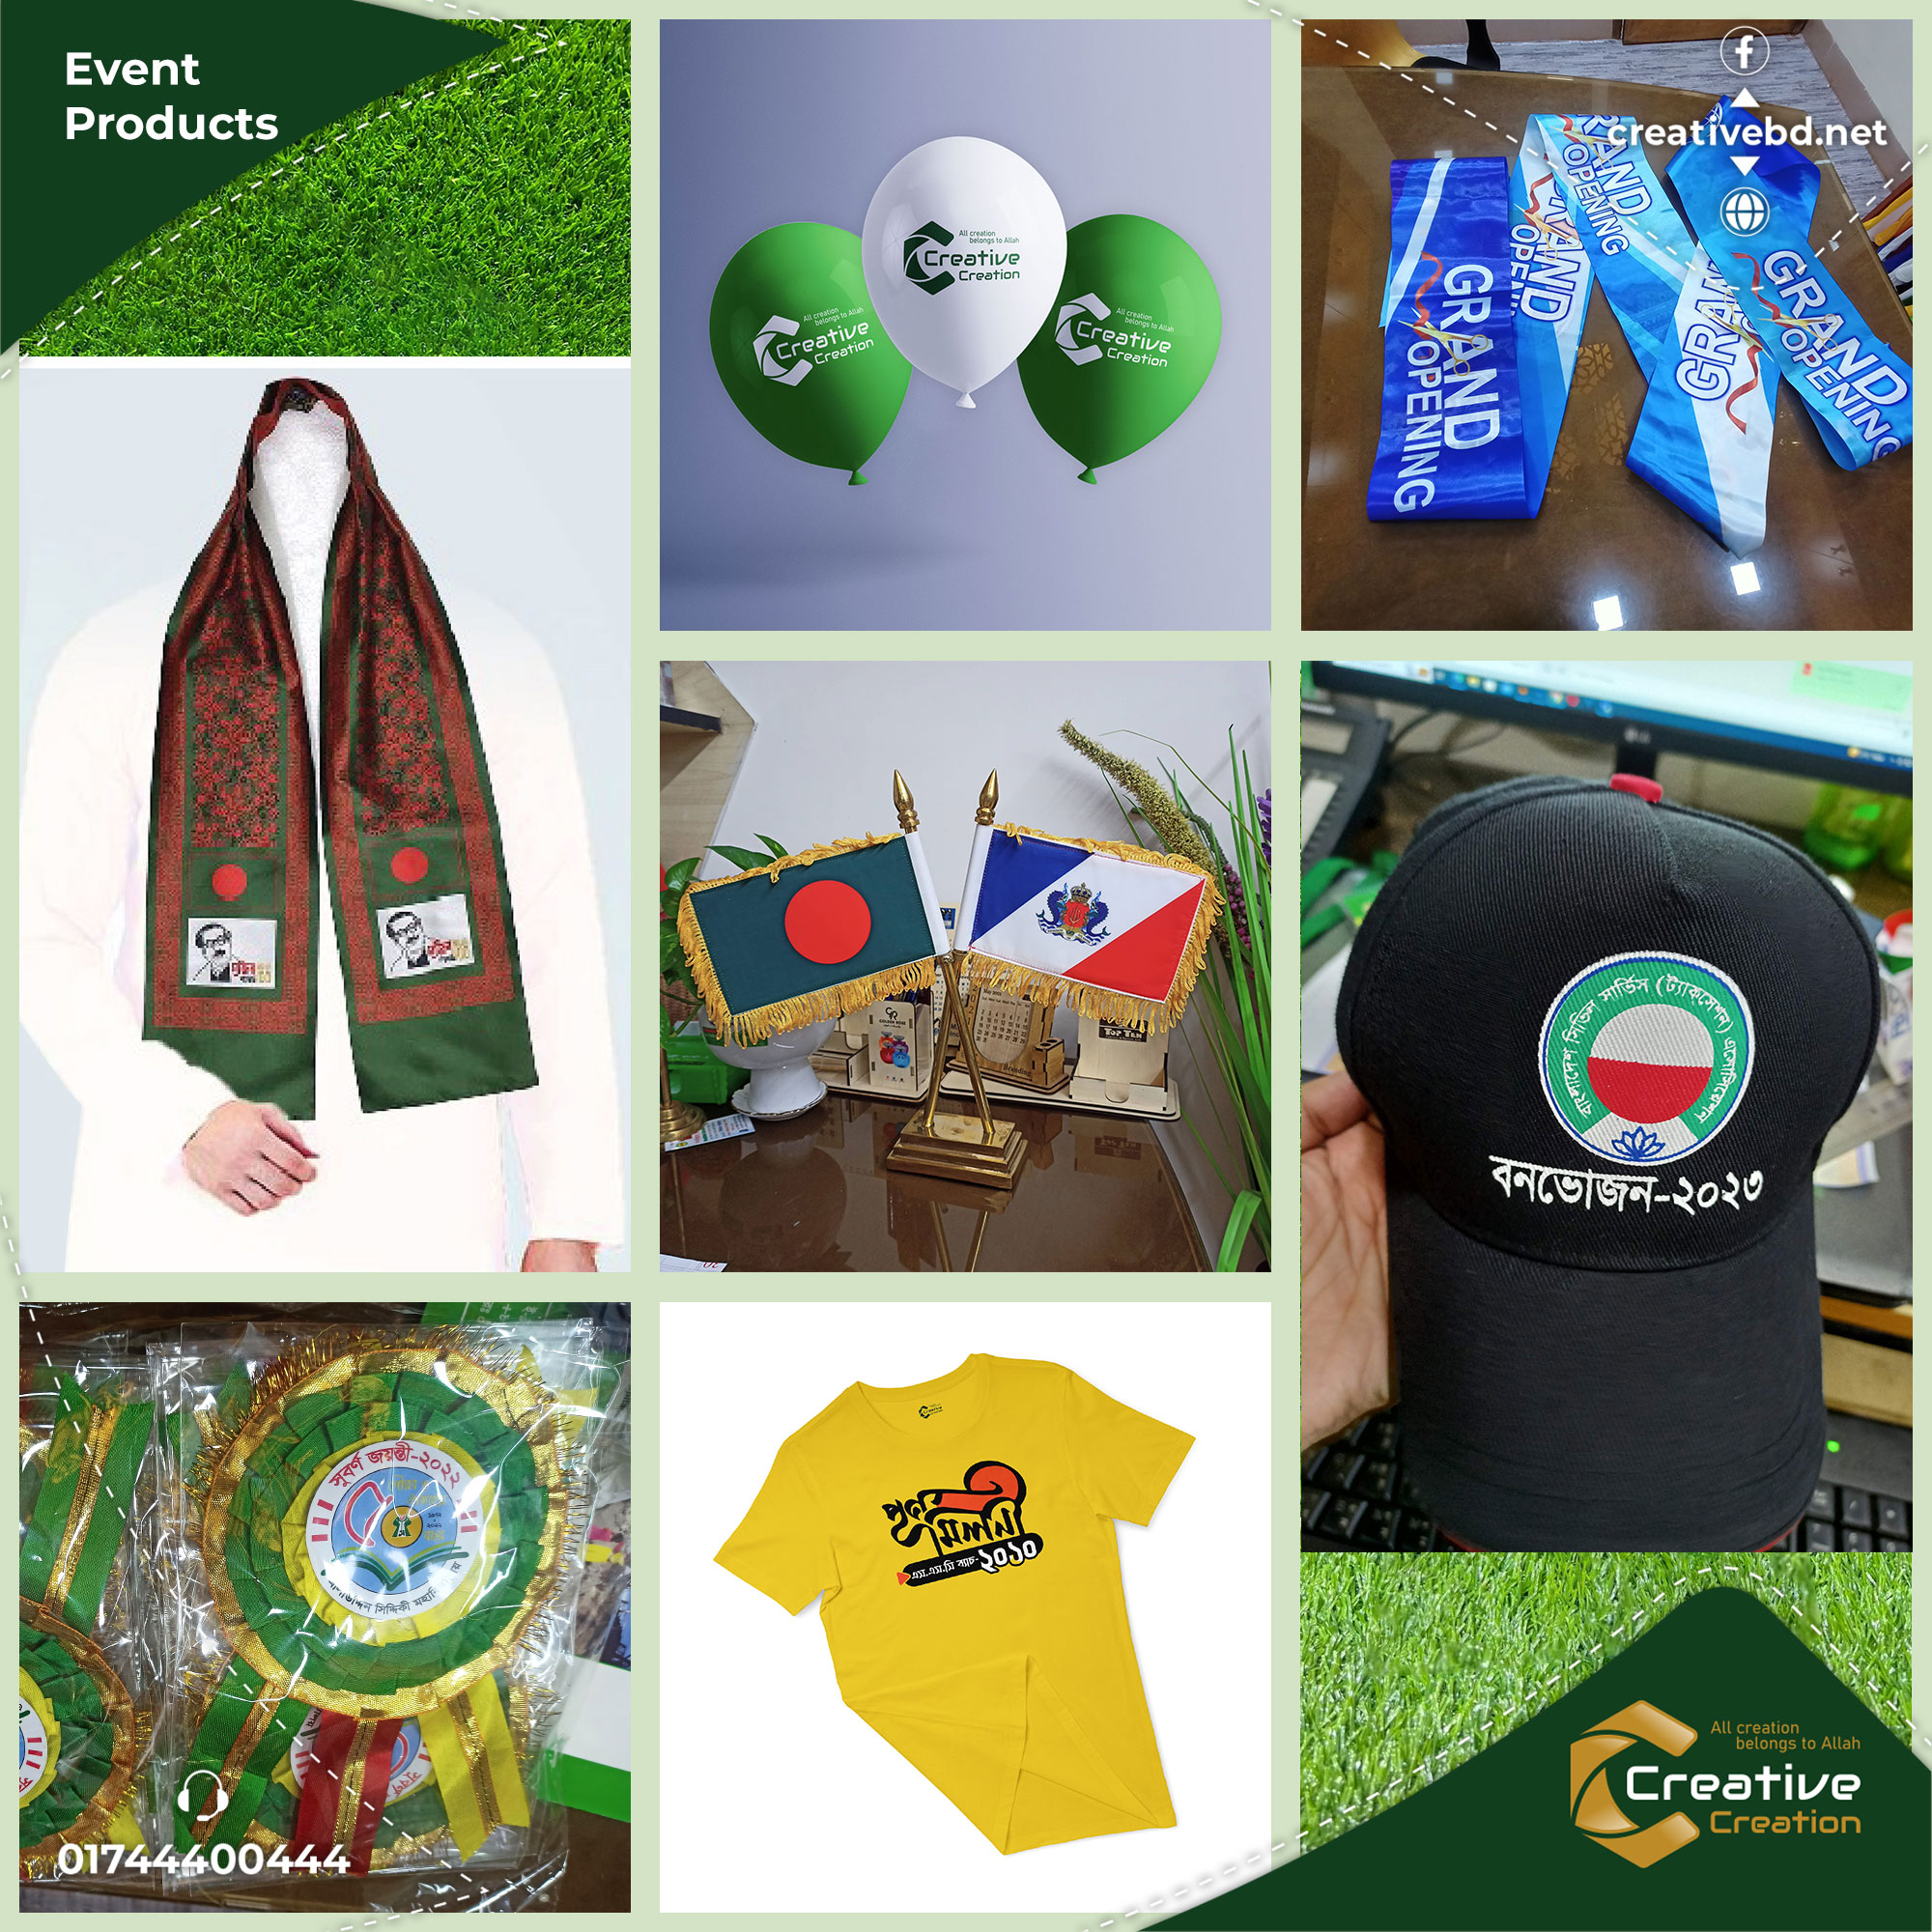 EVENT PRODUCTS